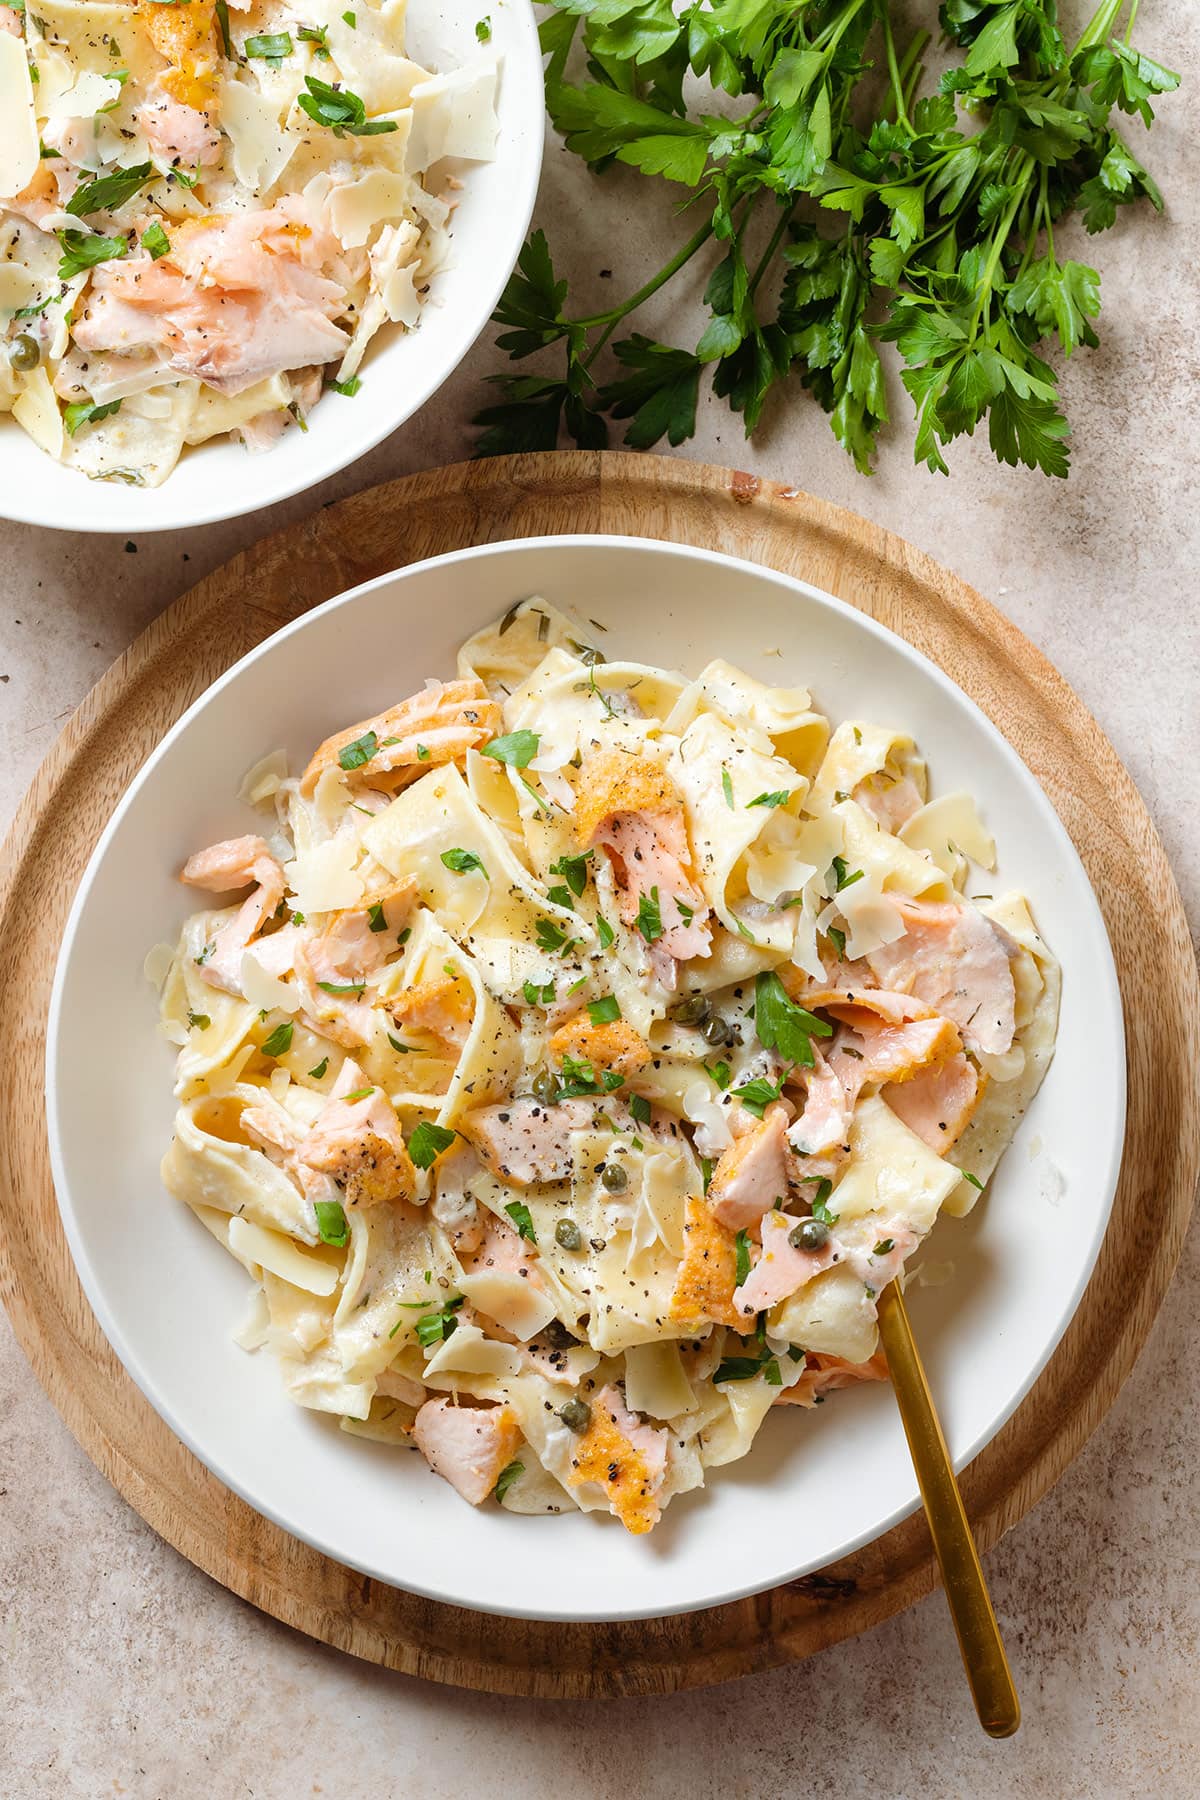 Pappardelle with roasted salmon, creamy white sauce, black pepper, and fresh herbs on a white plate.